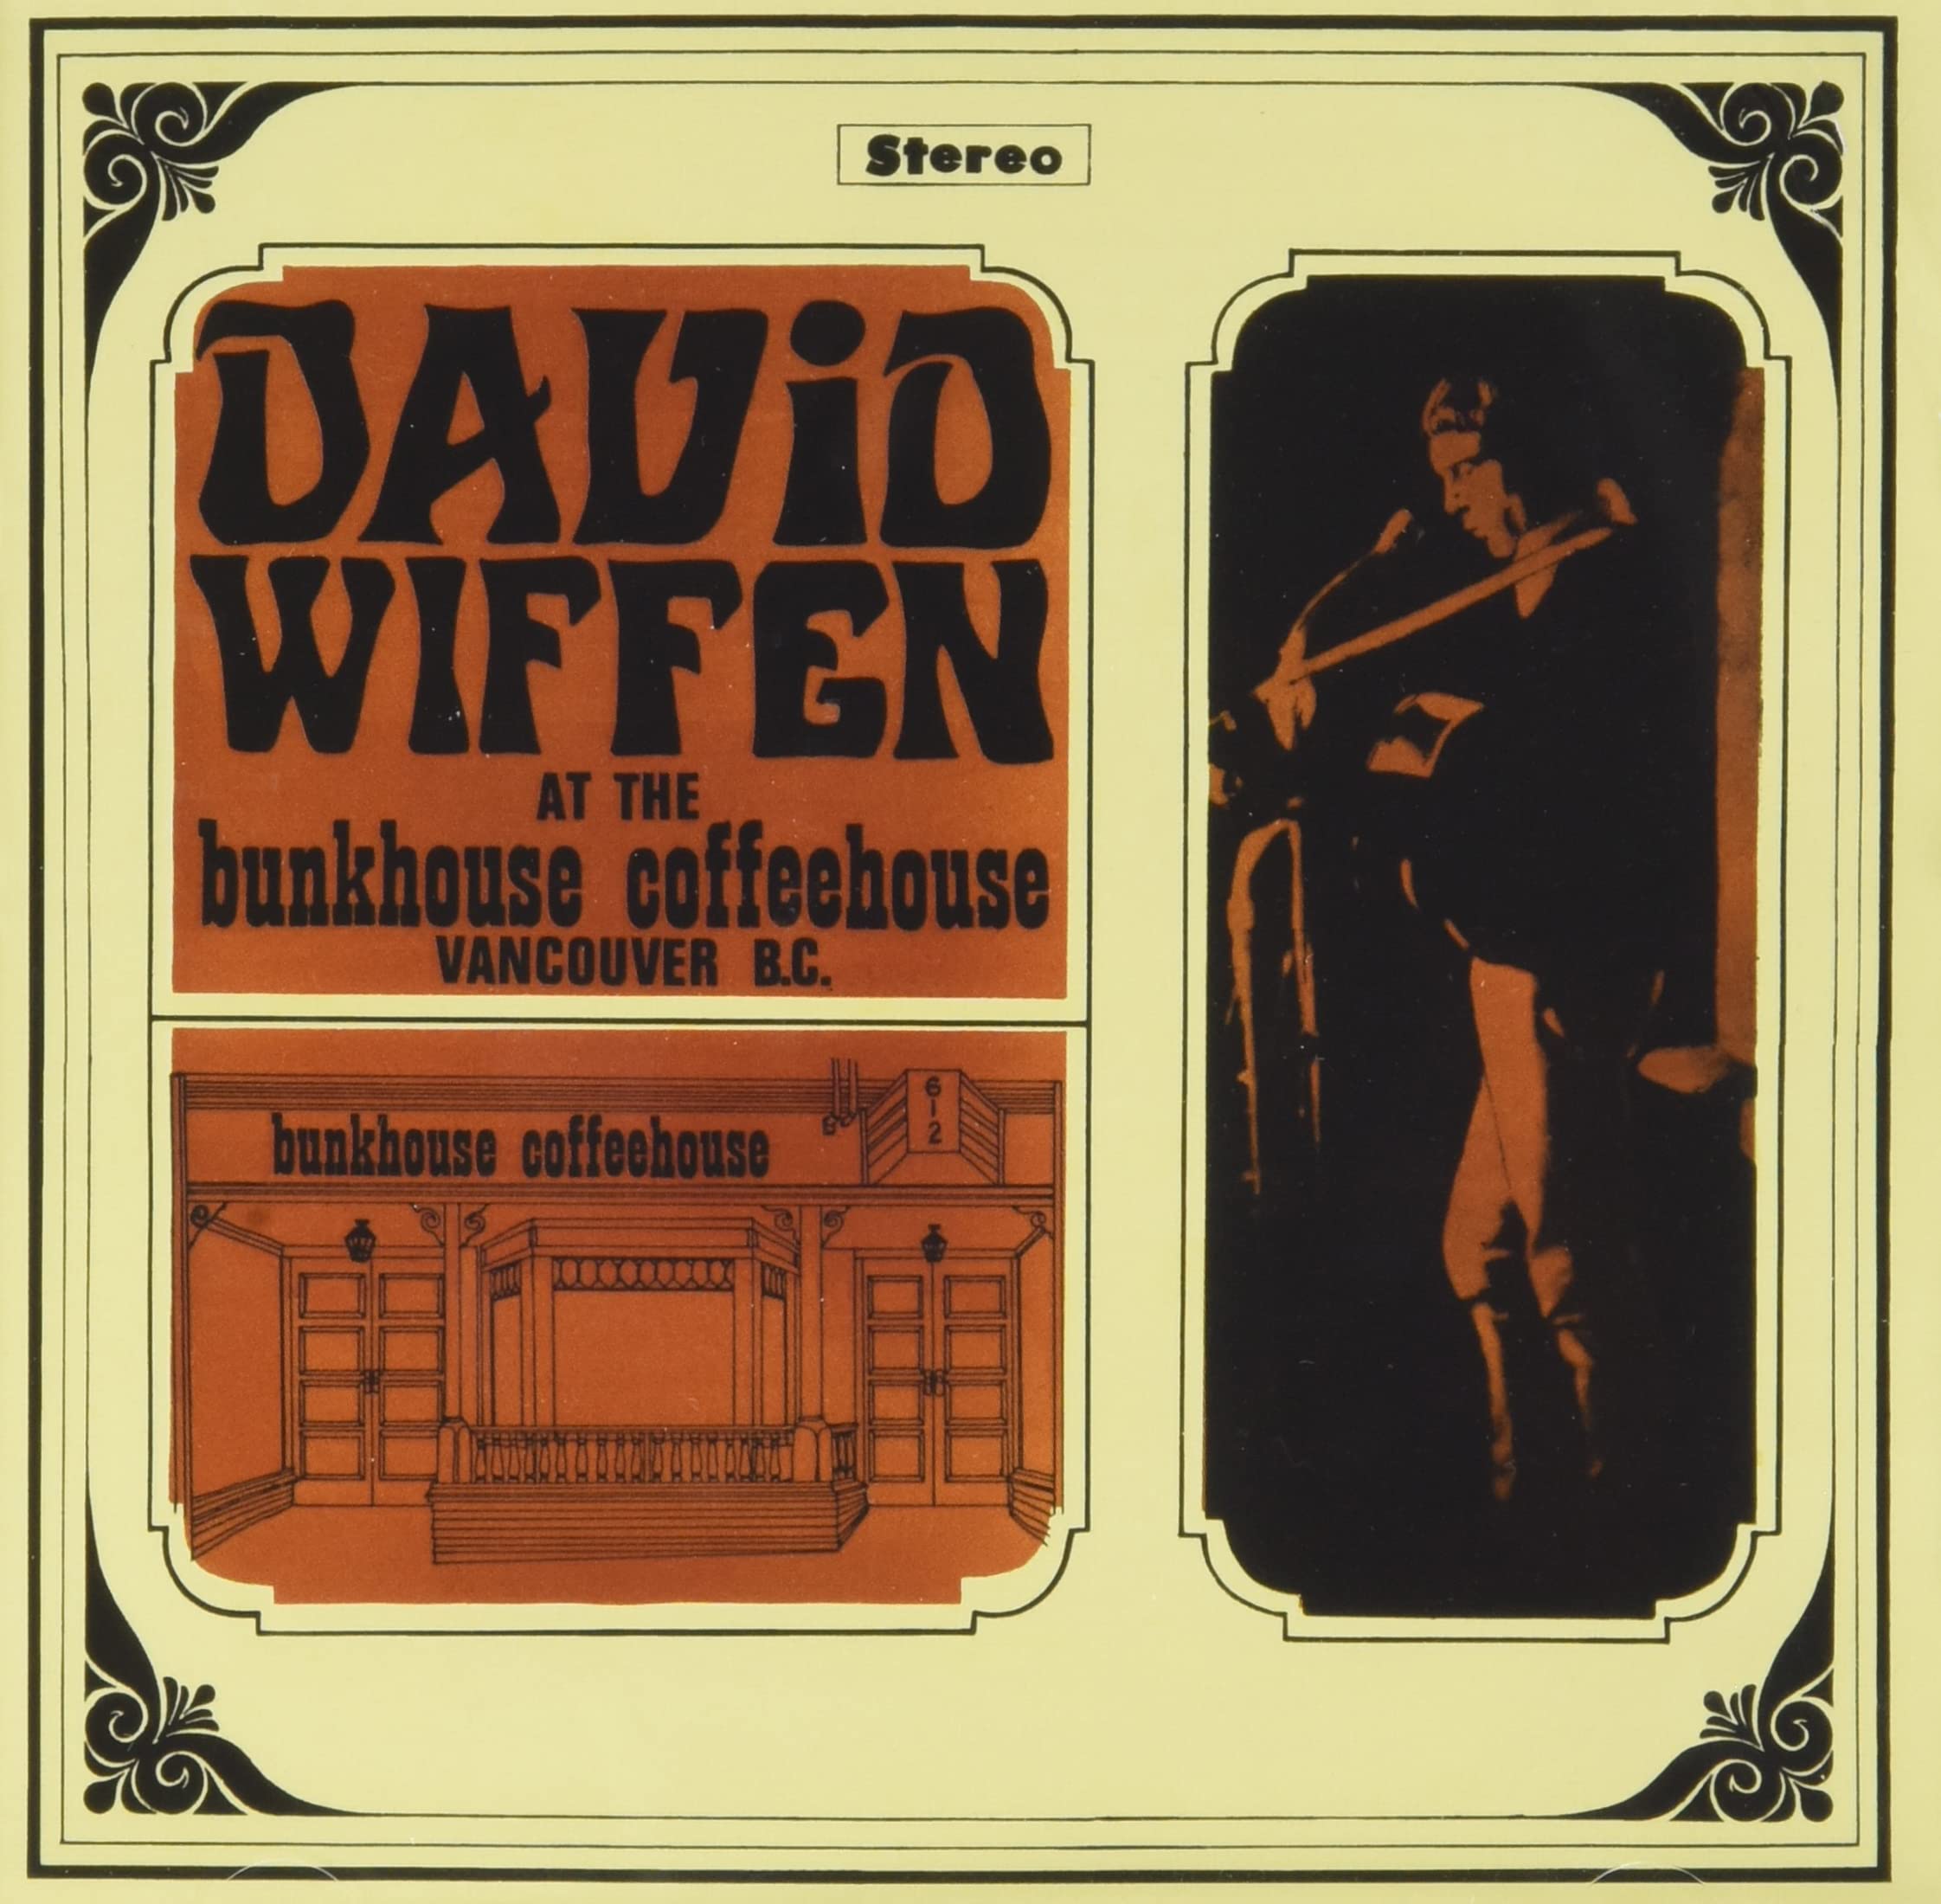 David Wiffen at the Bunkhouse Coffeehouse, Vancouver BC